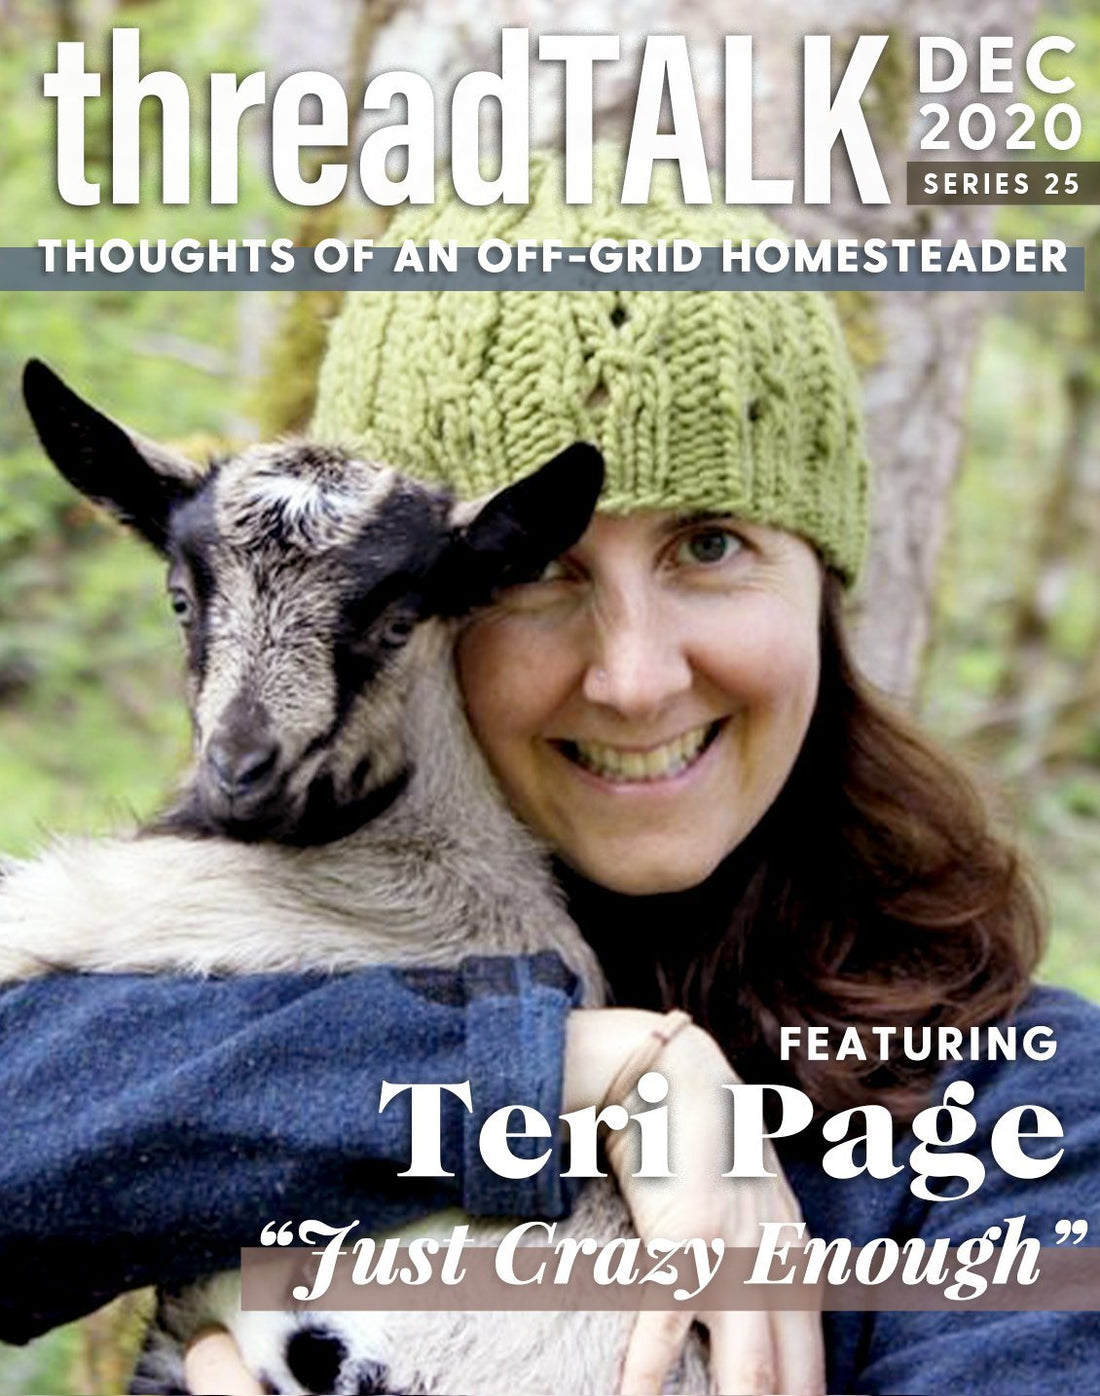 threadTALK Blog Series 25: Thoughts of an Off-Grid Homesteader with Teri Page - Stories You Can Wear